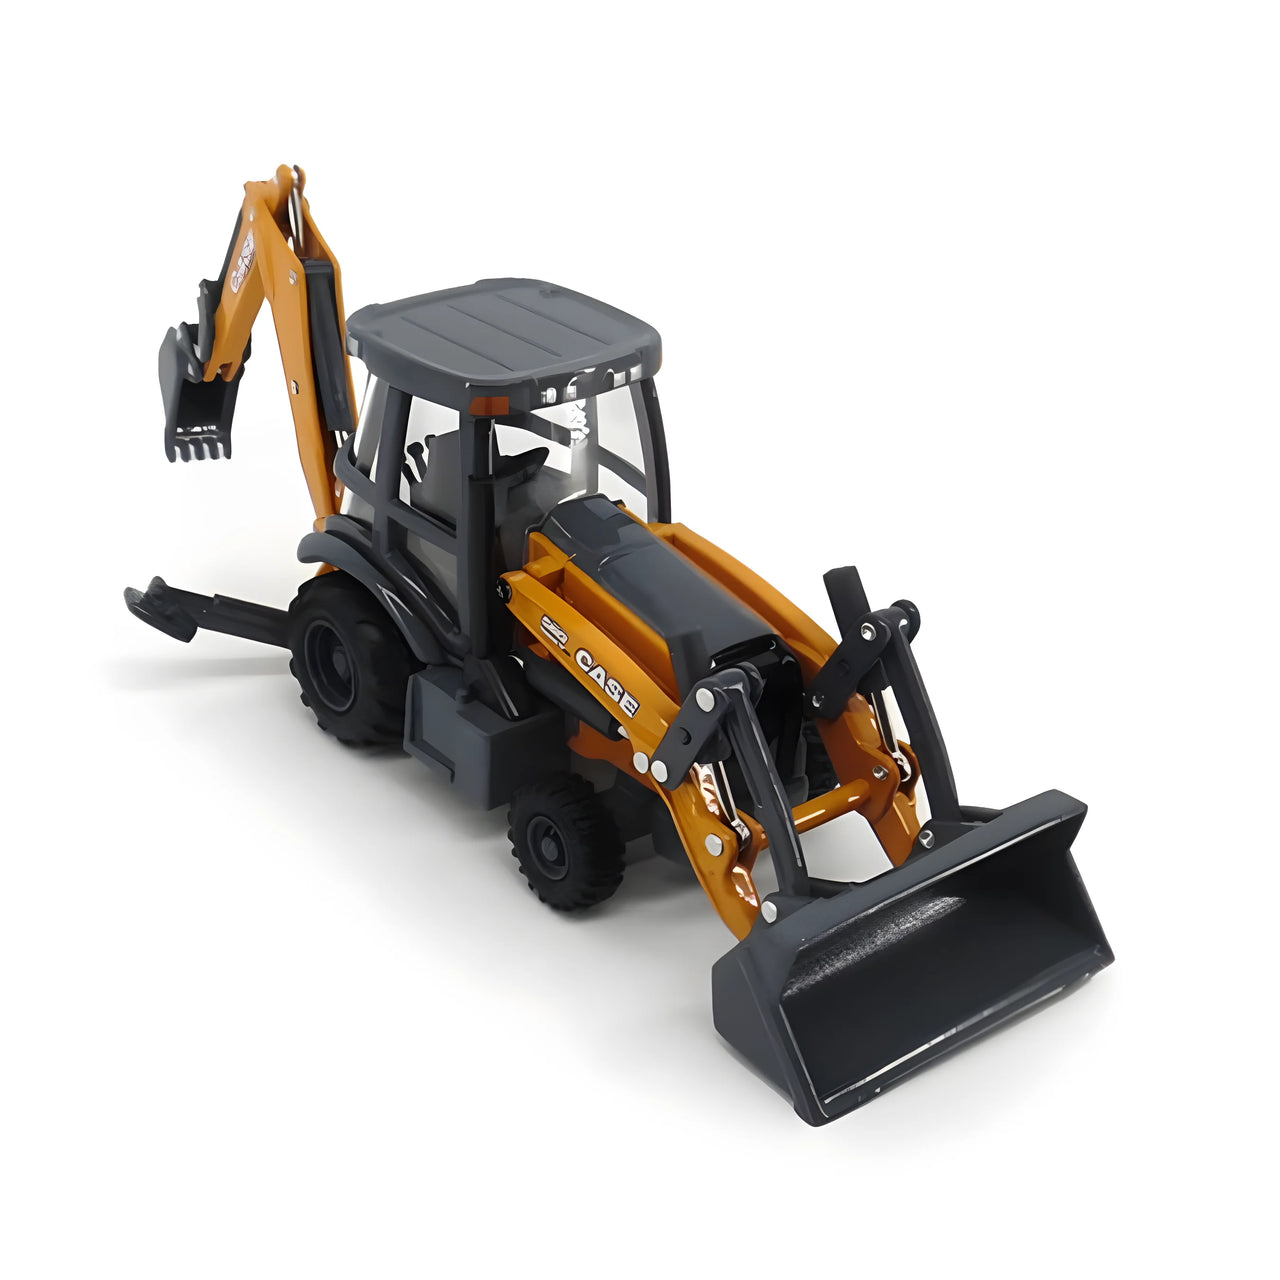 14991 Case 580 Backhoe 1:50 Scale (Discontinued Model)